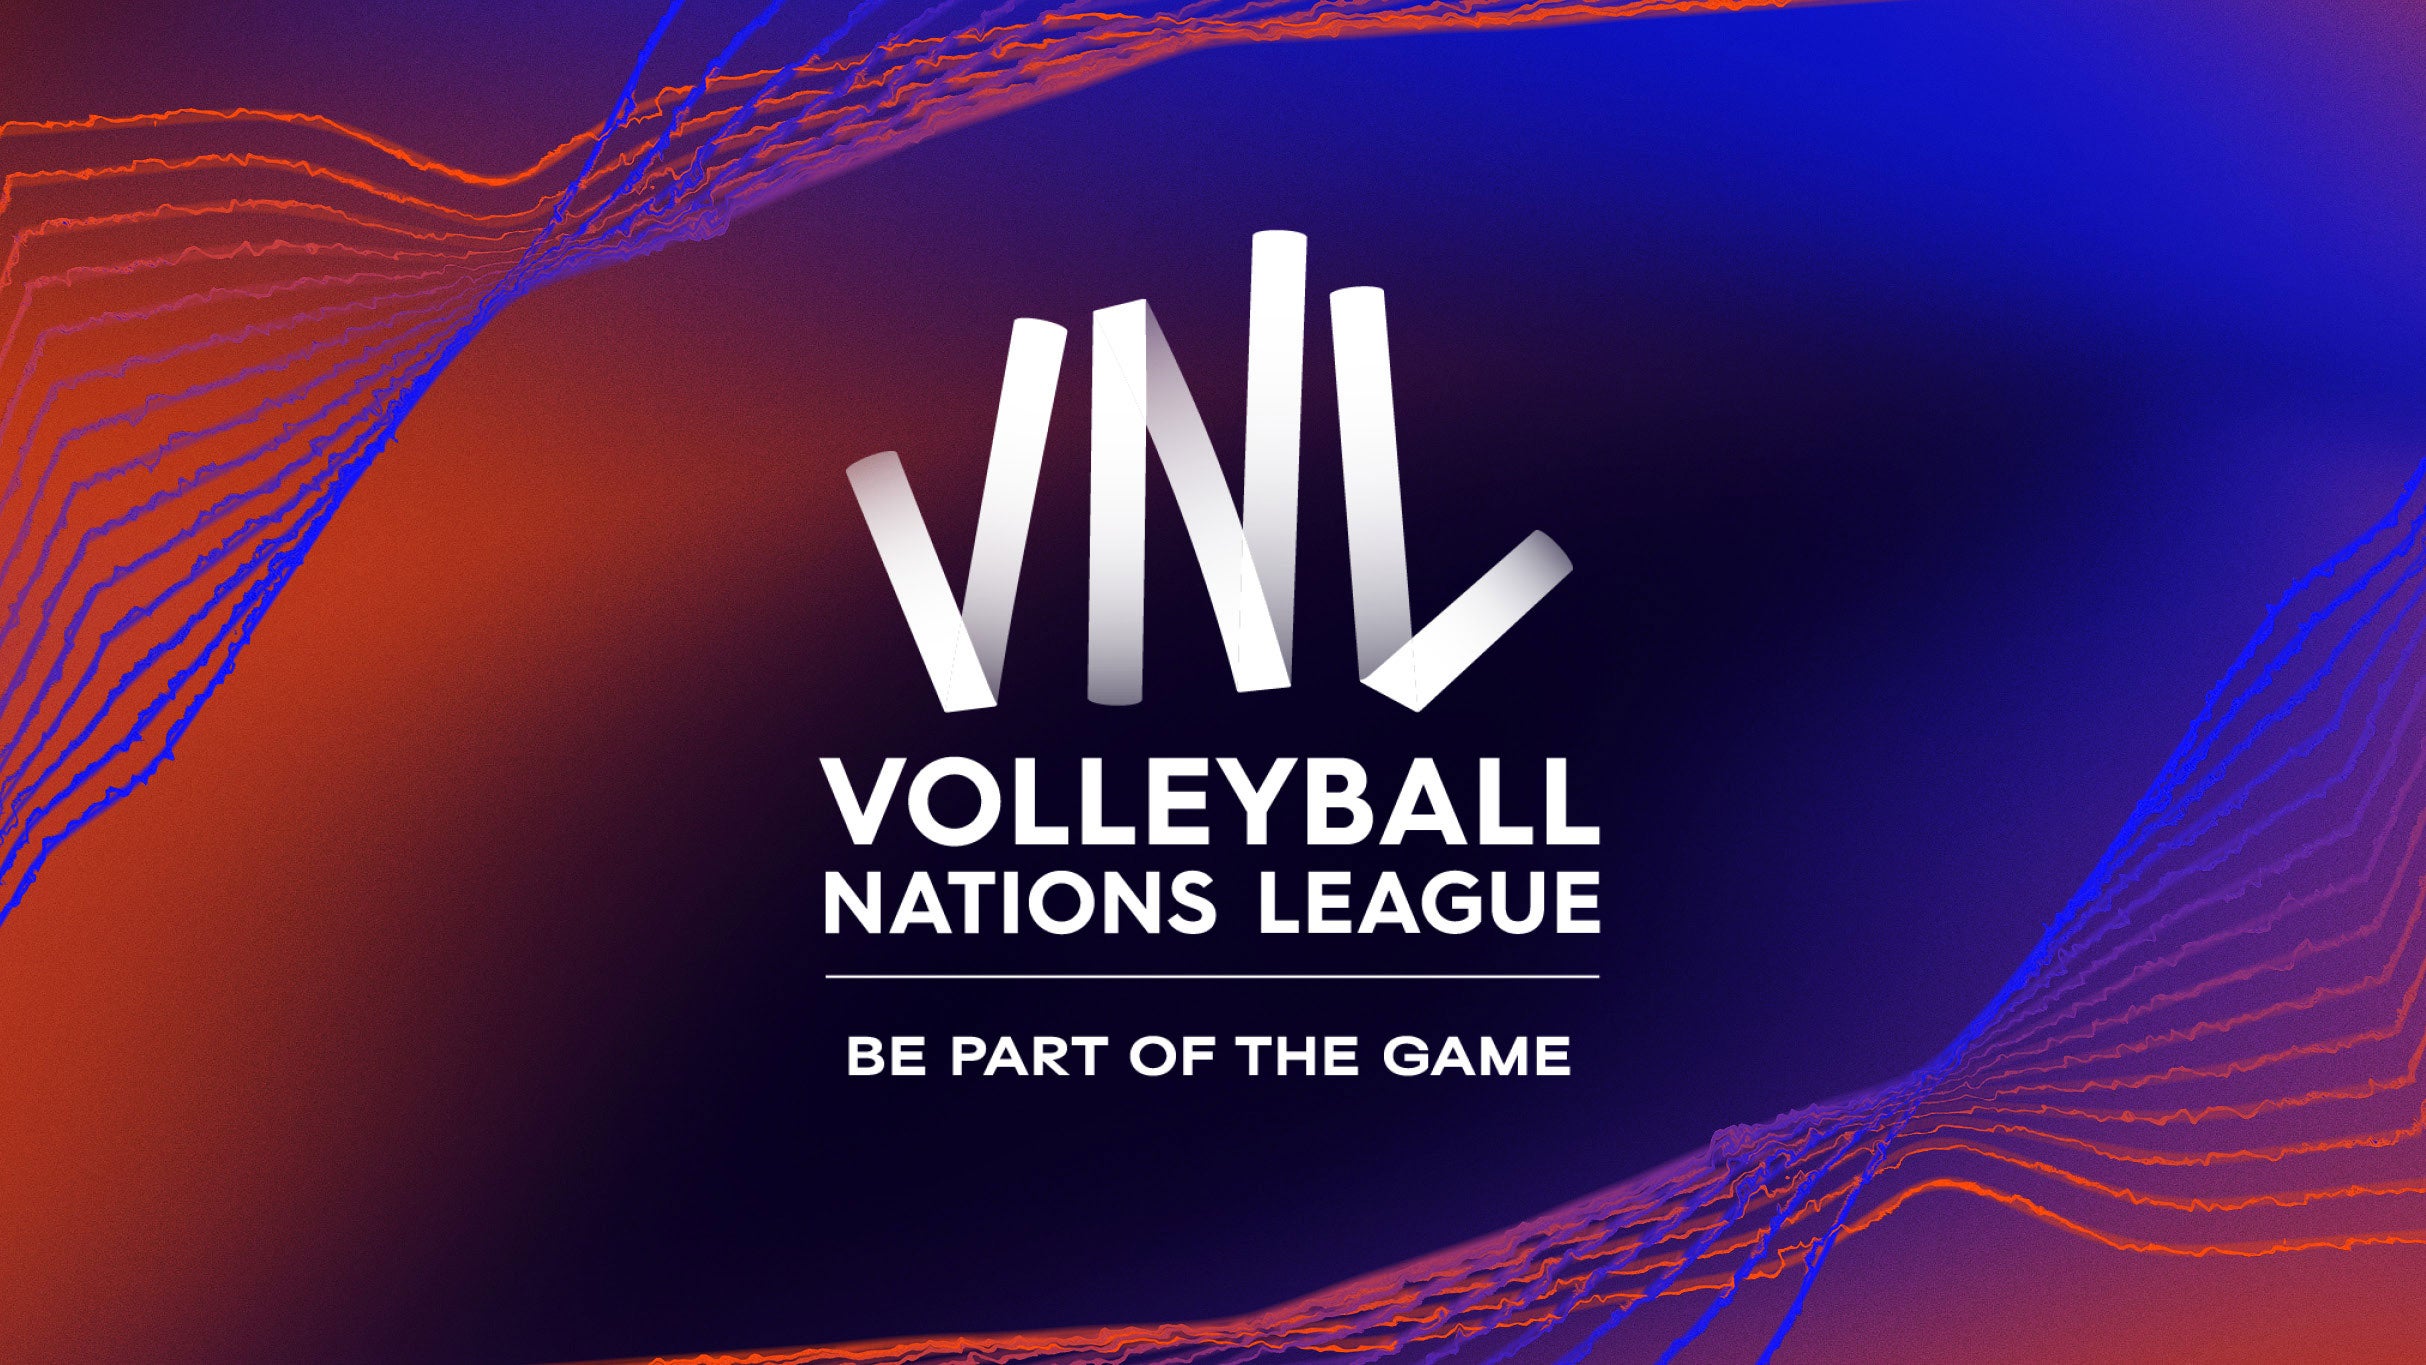 Volleyball Nations League - Match Day 3 presales in Ottawa